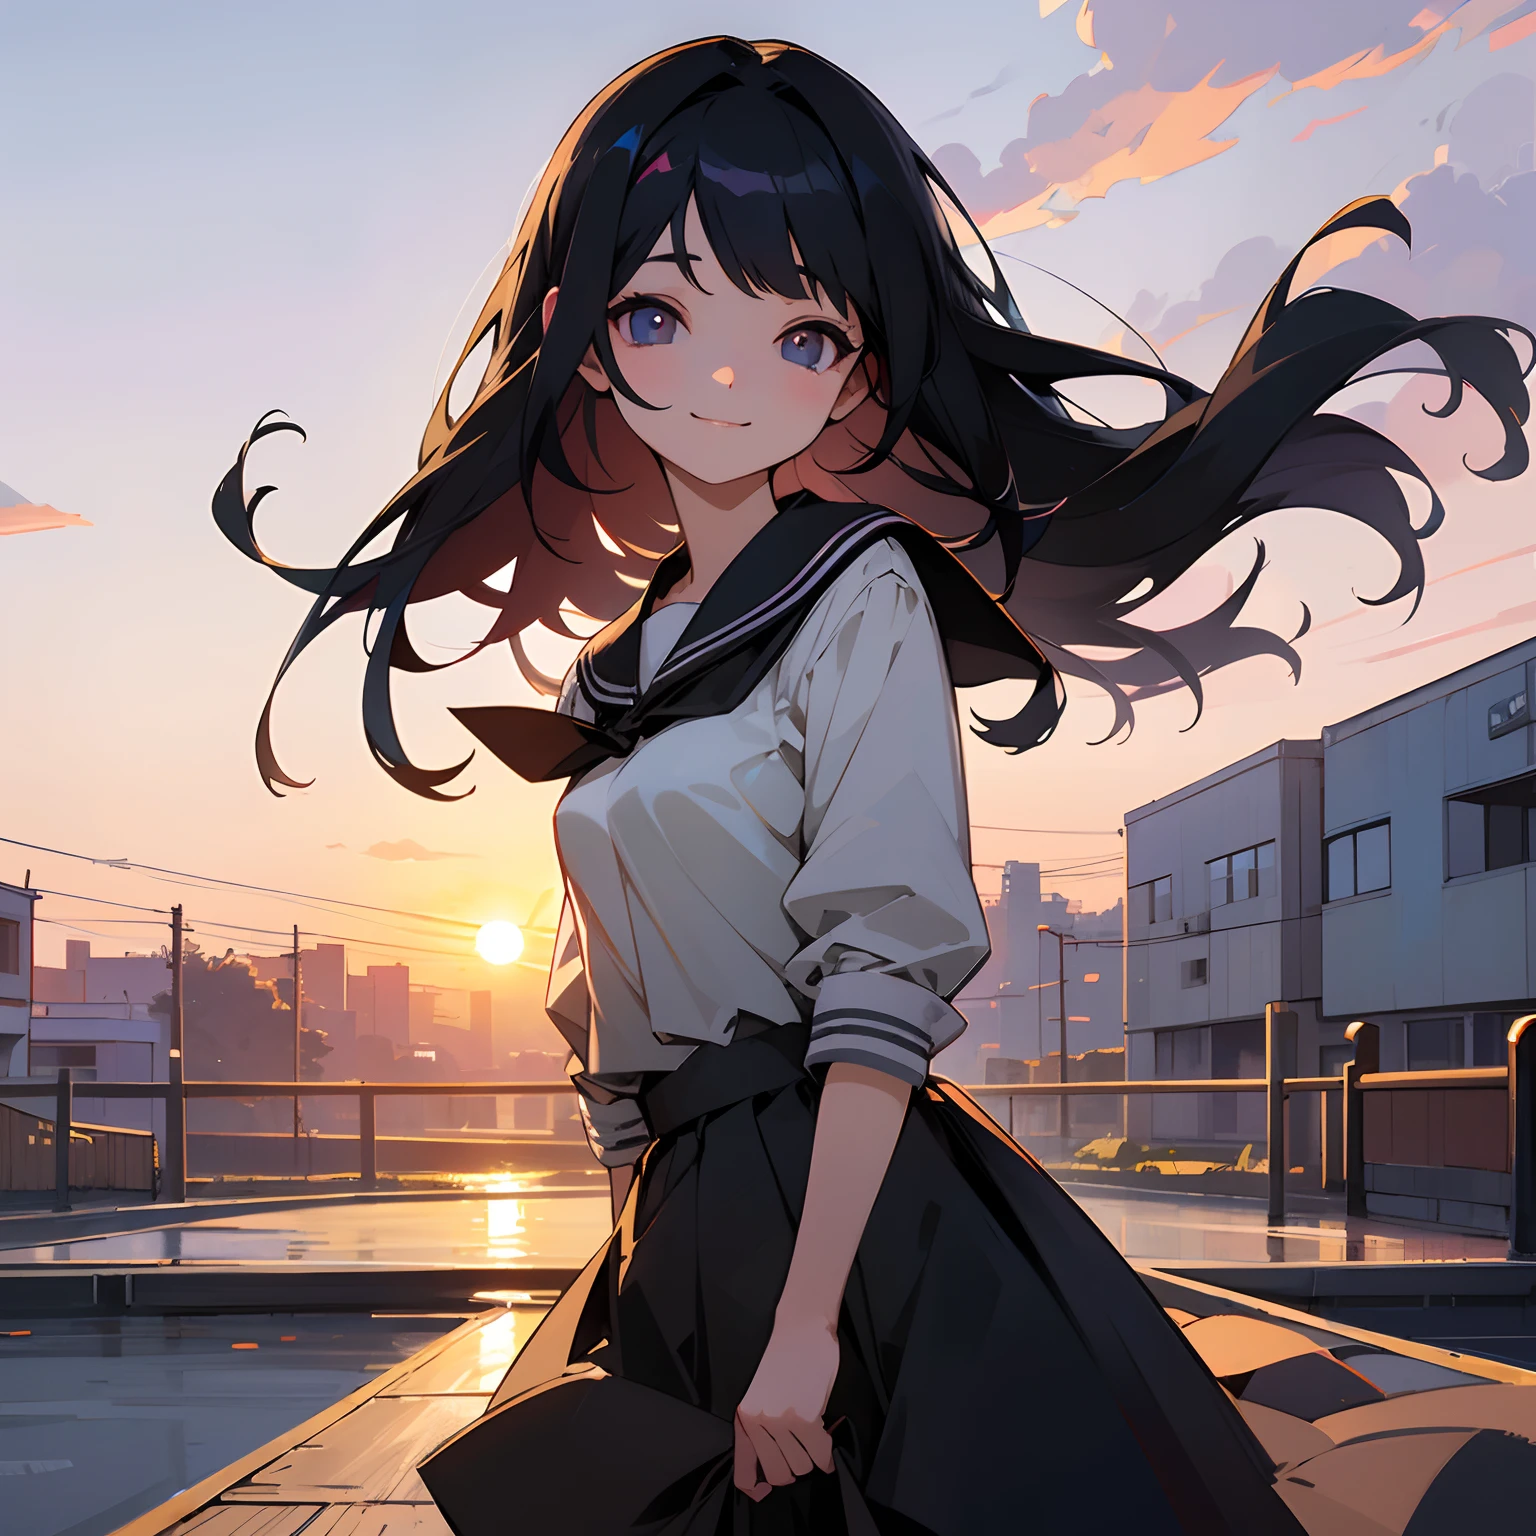 Beautiful illustration、top-quality、girl with、Black hair、shorth hair、hair adornments、high-school uniform、A slight smil、(((Delicat eyes)))、evening、Residential area、Sunset